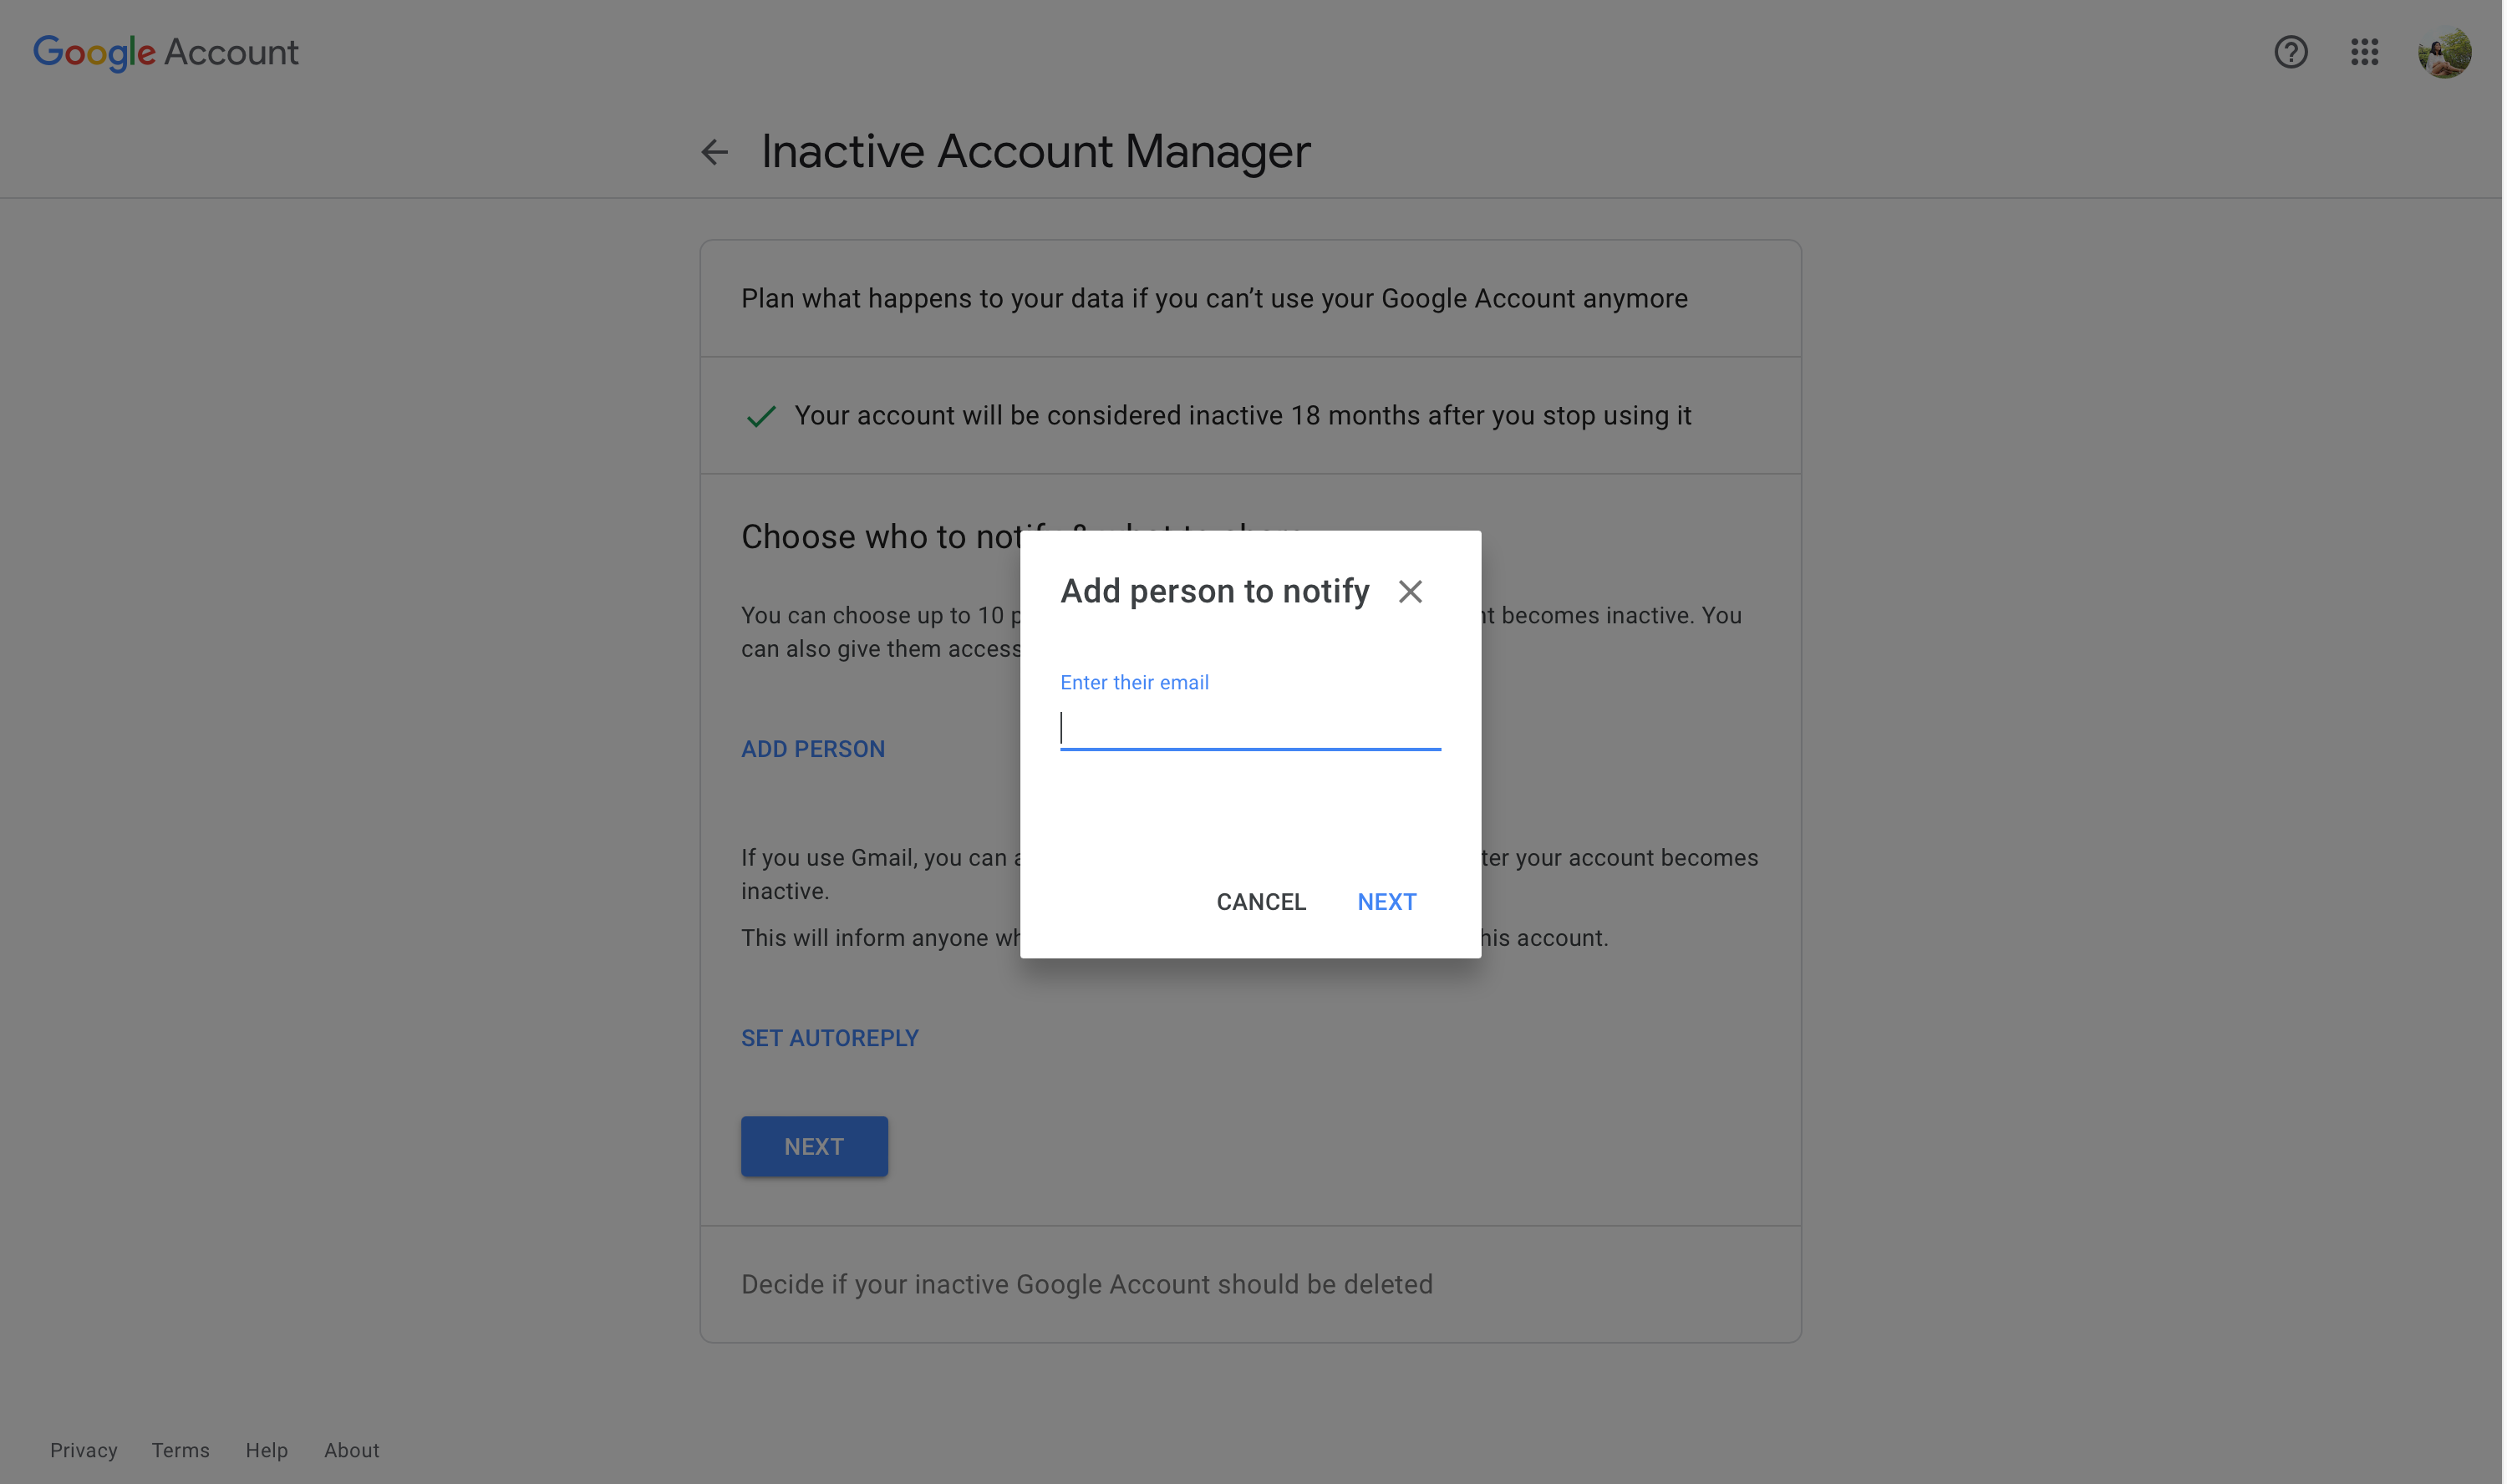 Google Inactive Account Manager - Add Person